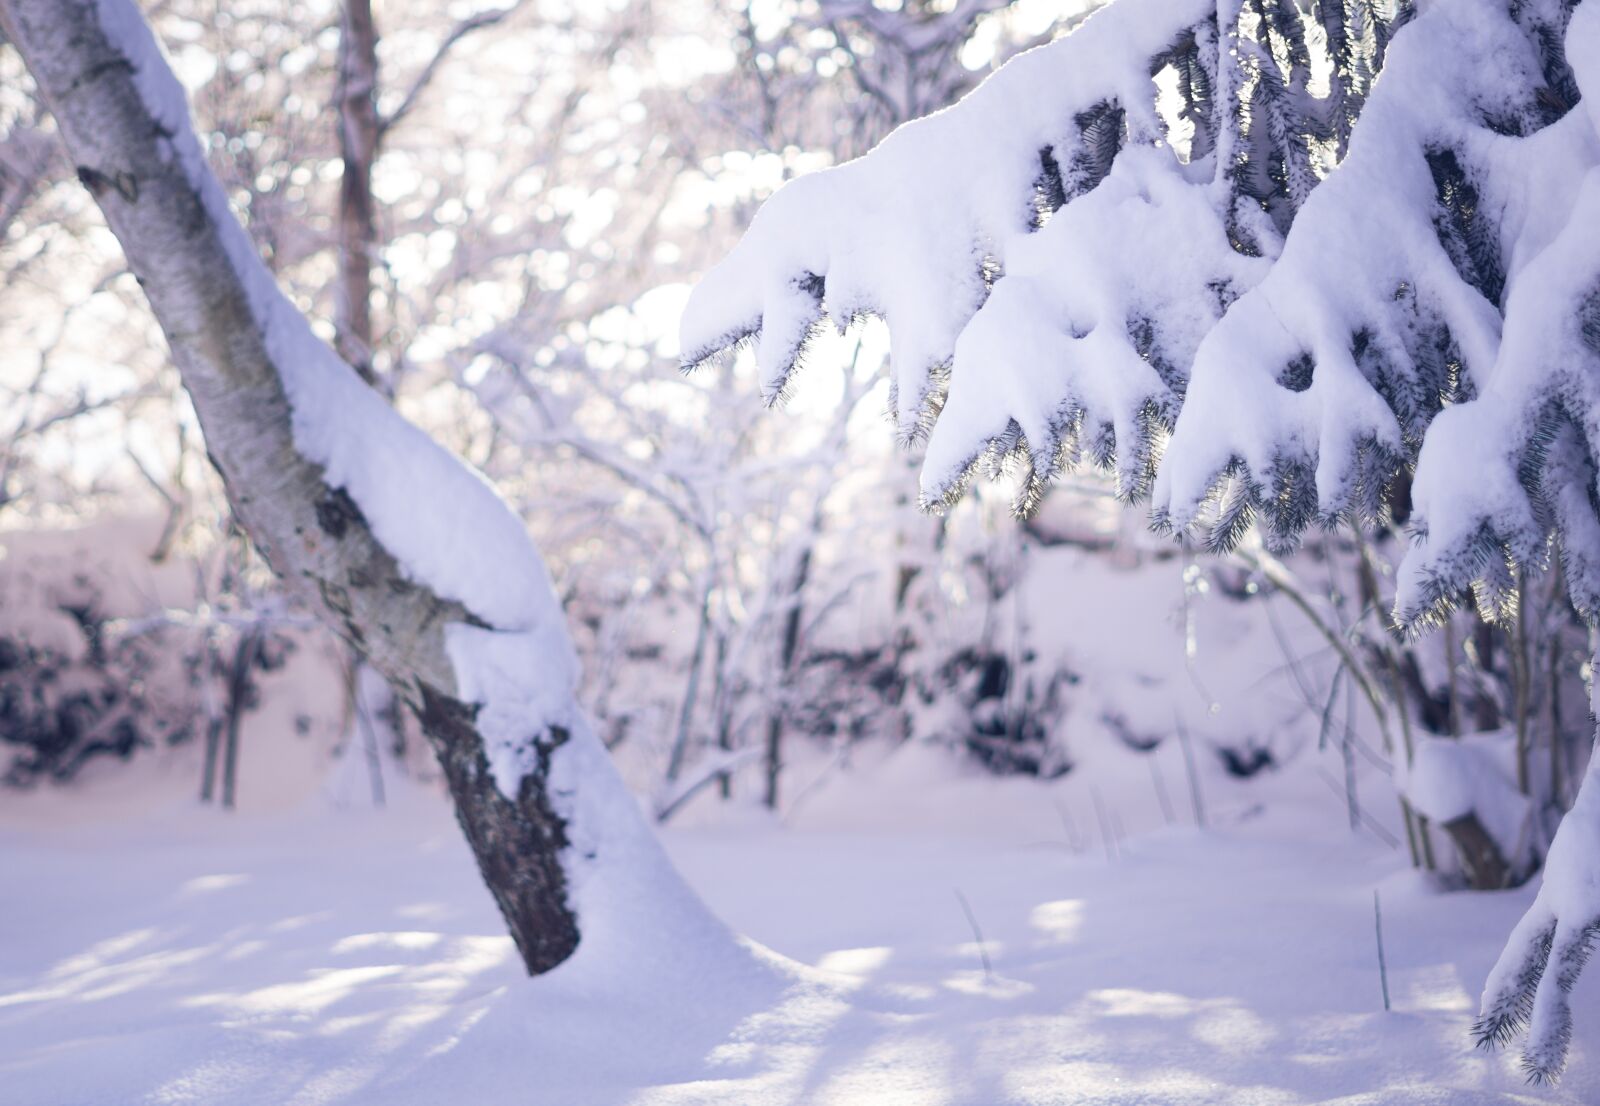 Sony a6000 sample photo. Snow, winter, nature photography